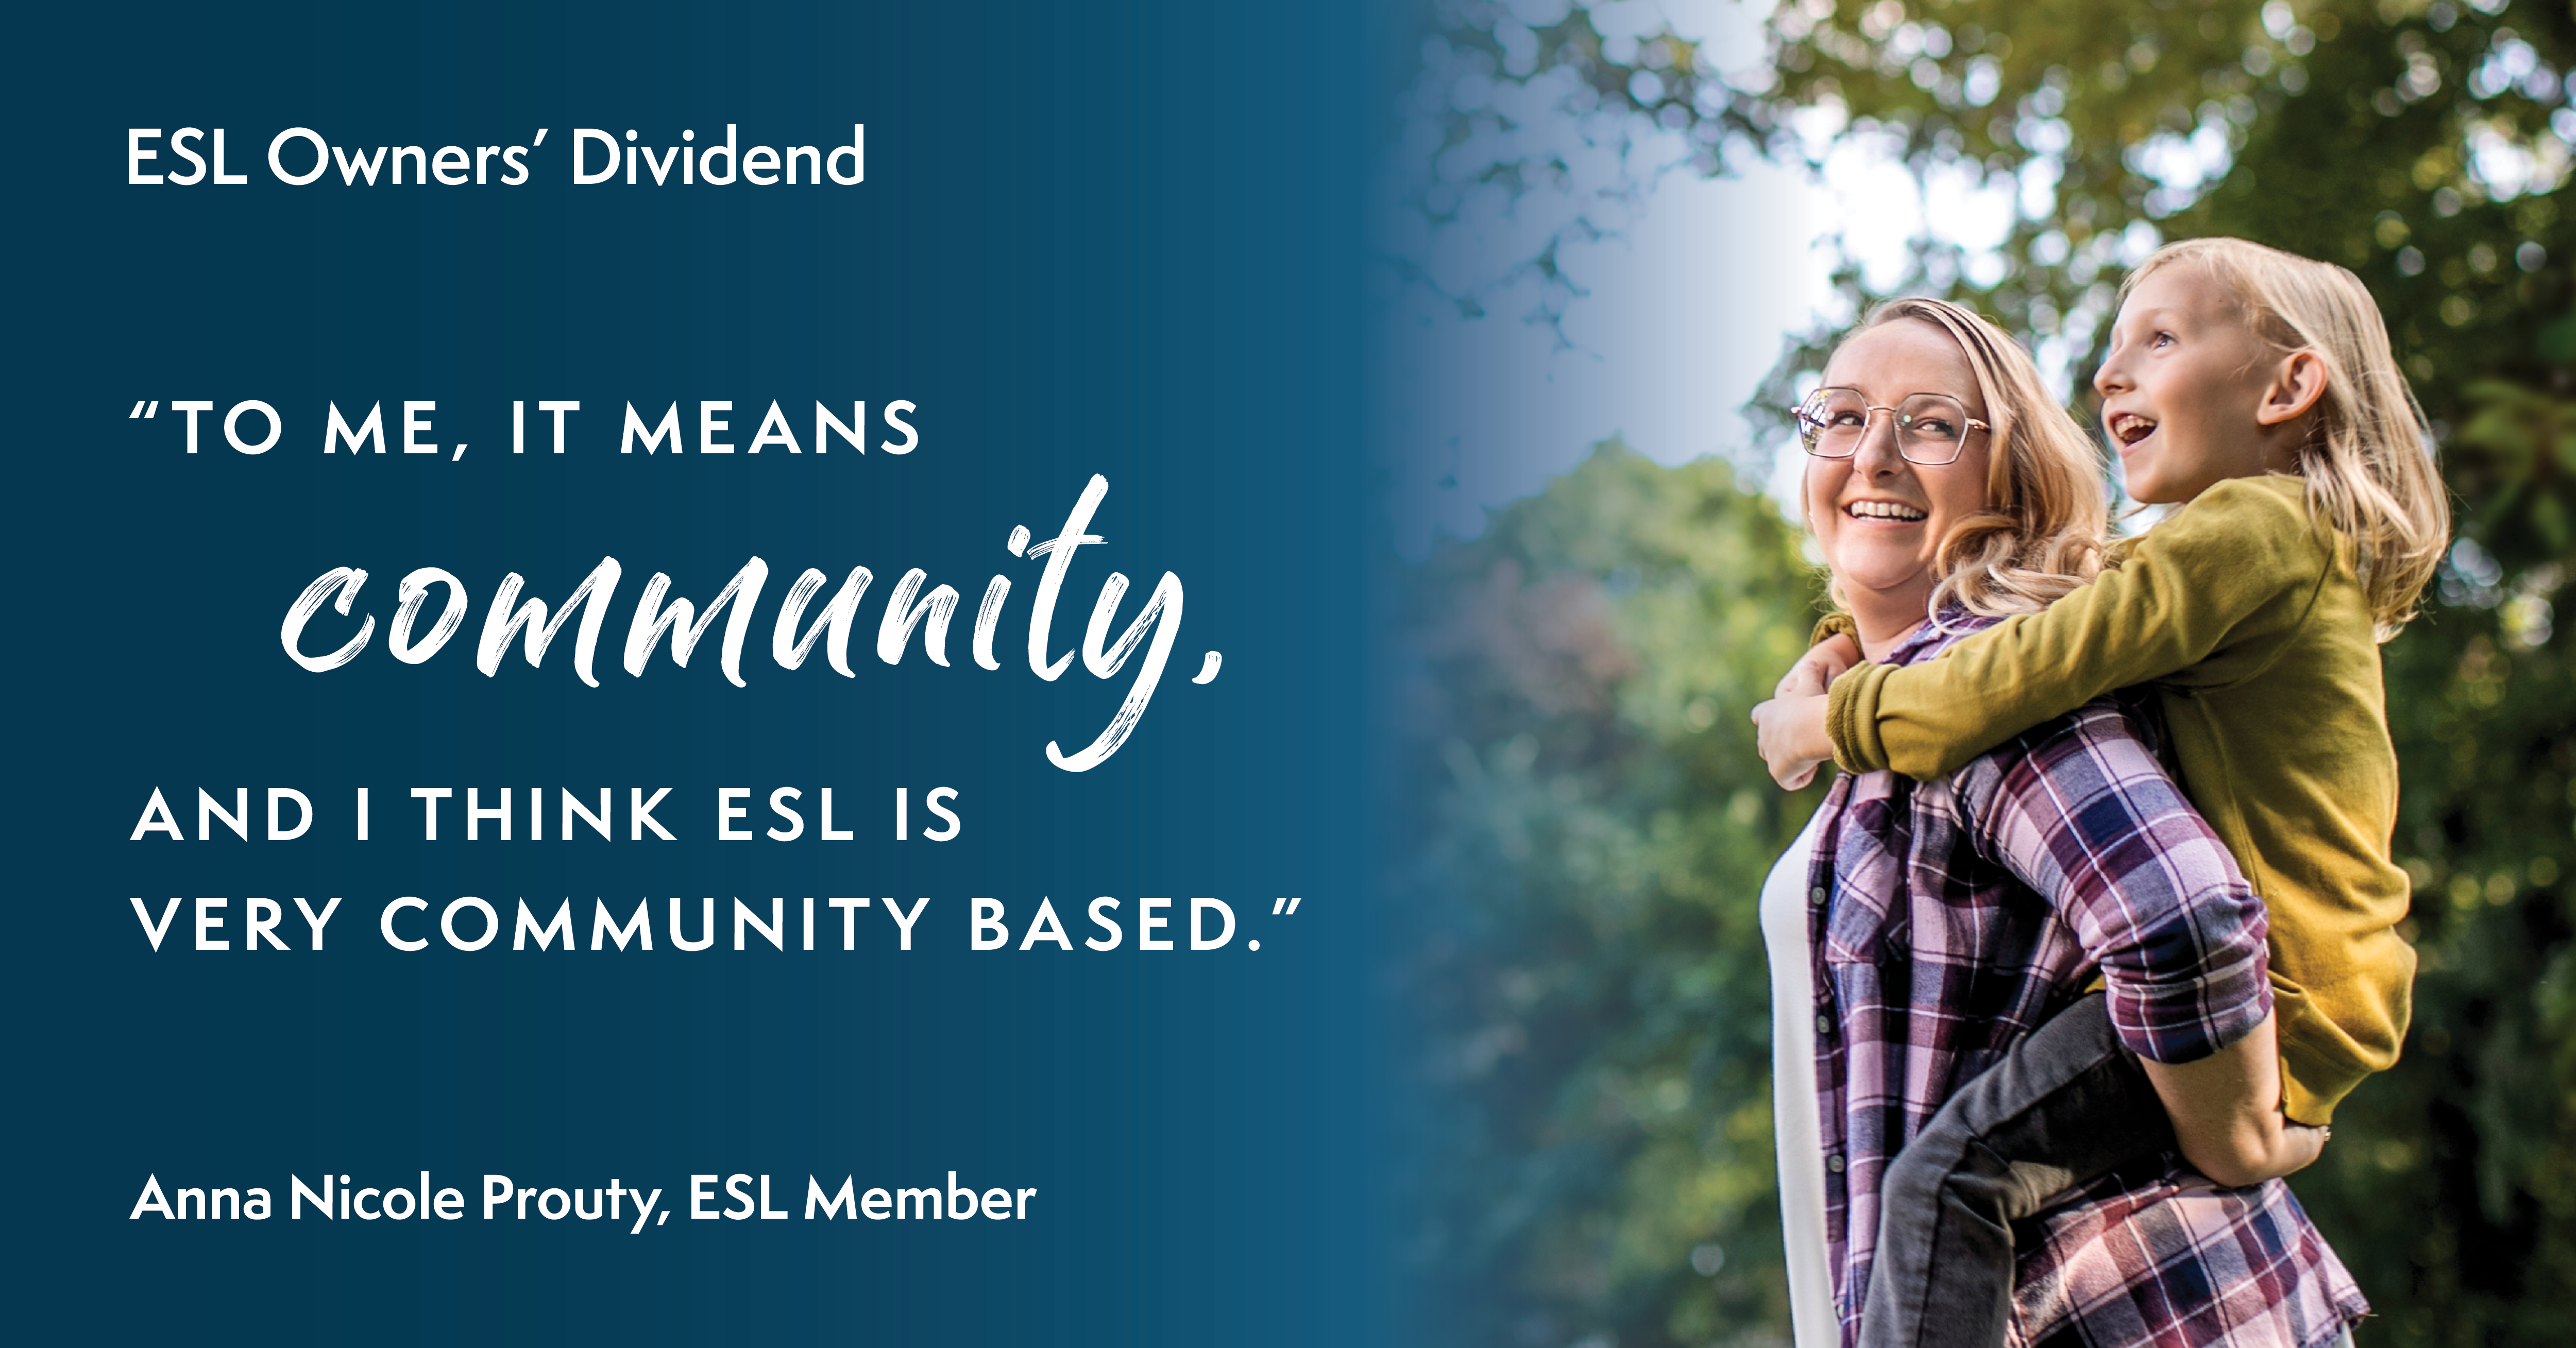 ESL Owners' Dividend. 'To me, it means community, and I think ESL is very community based.' Anna Nicole Prouty, ESL Member